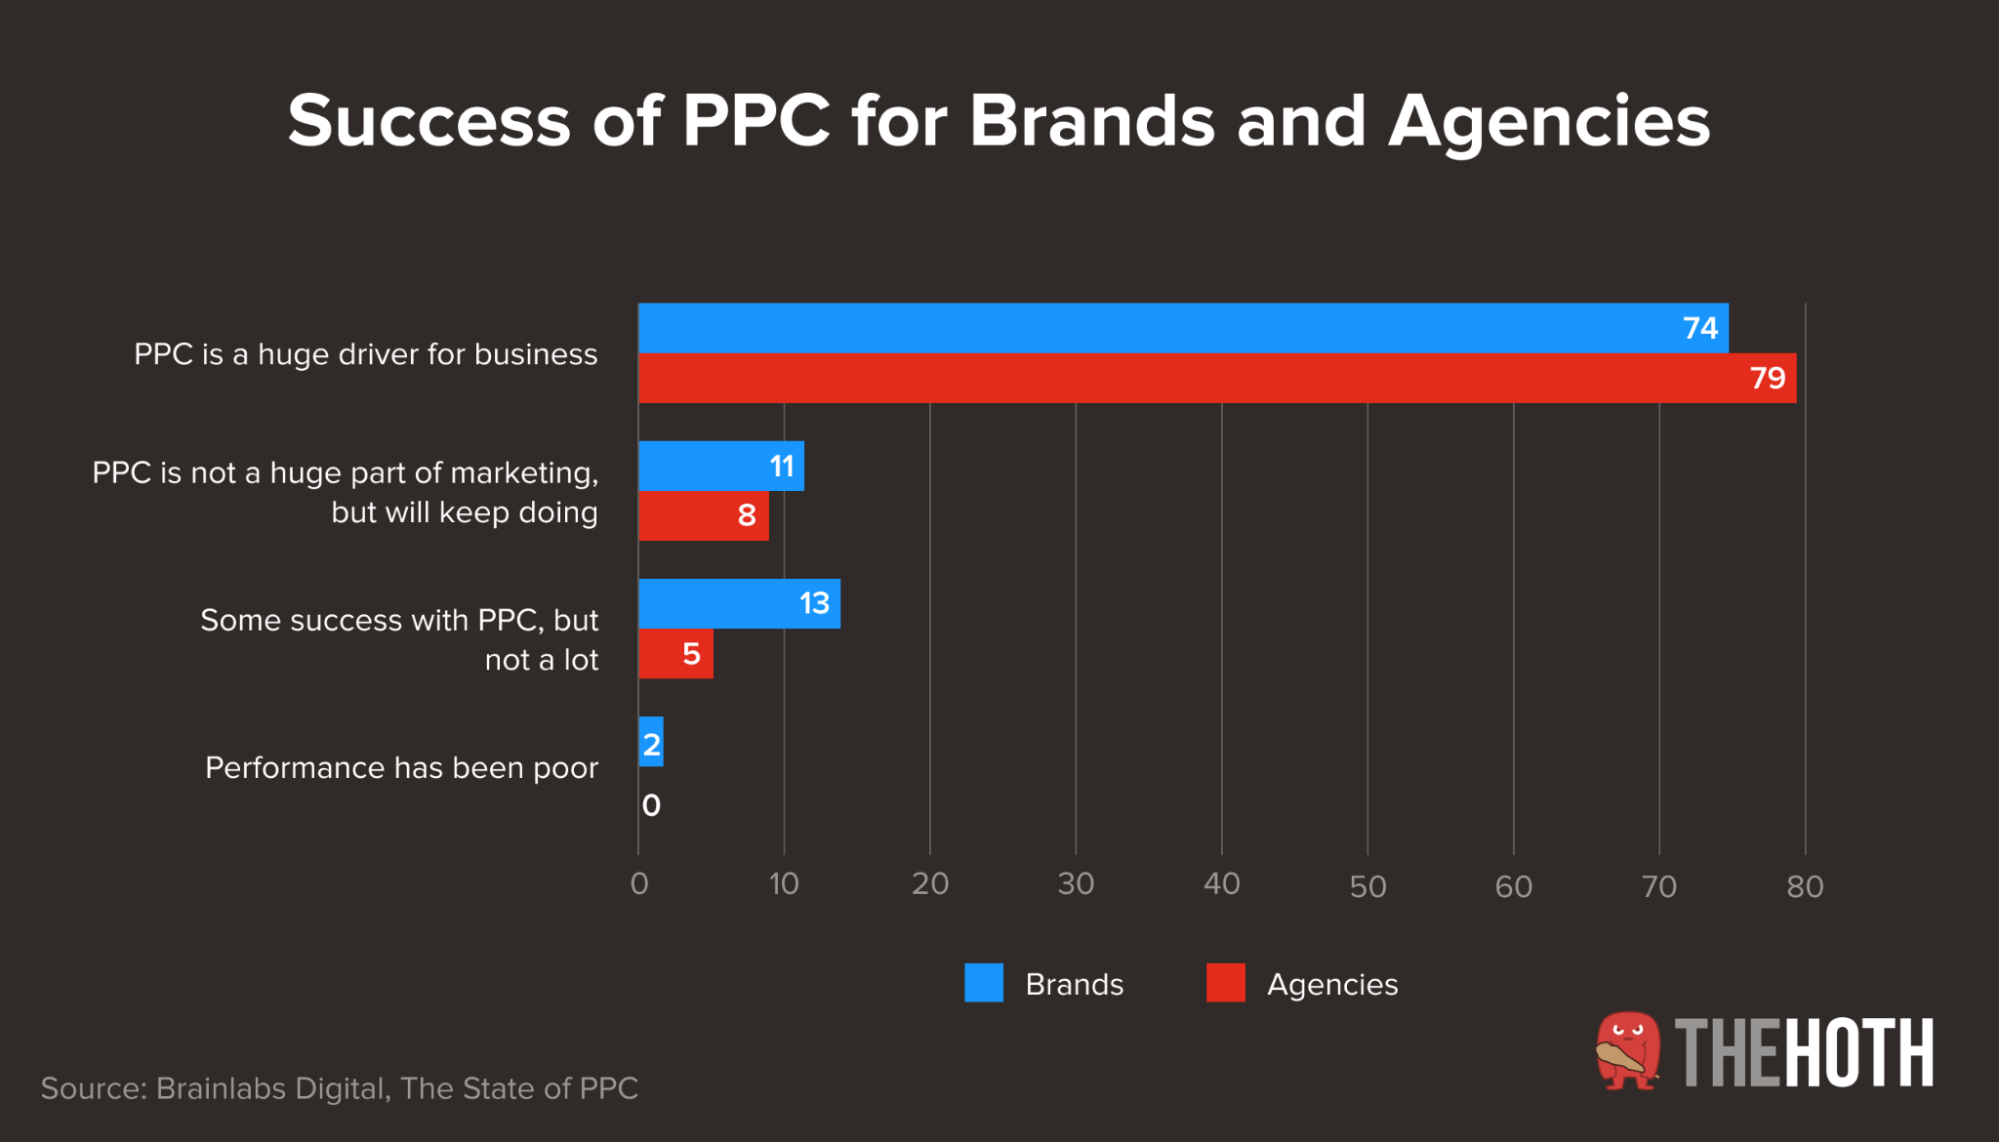 How successful is ppc for brands?